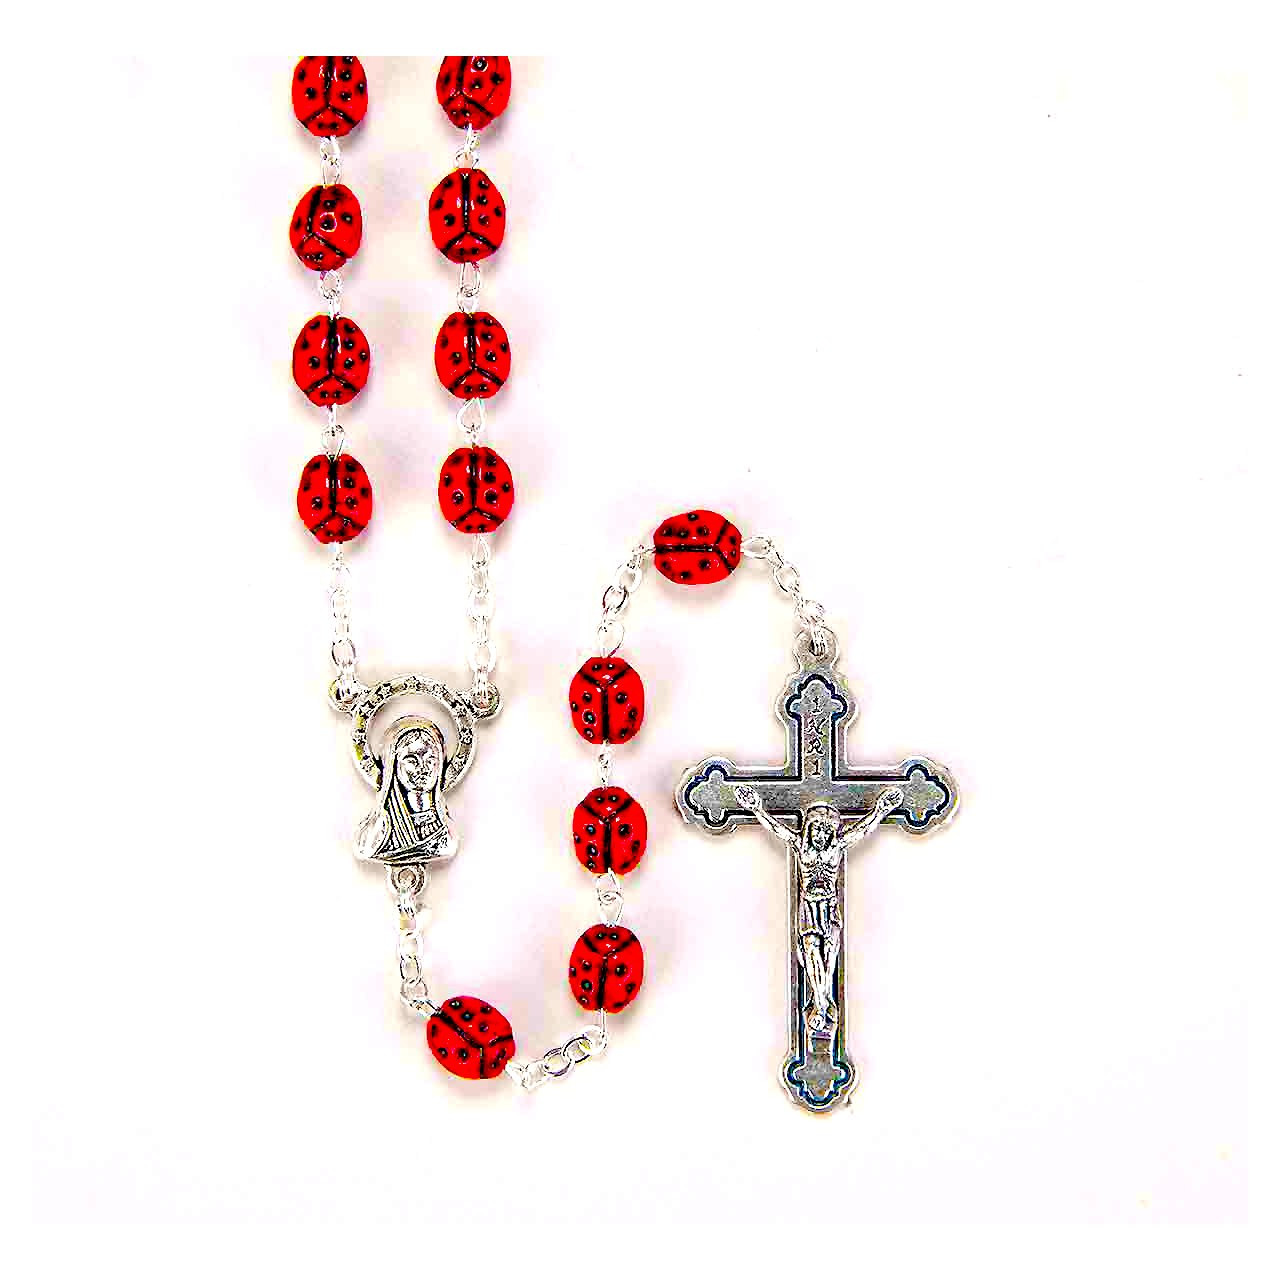 Ladybug Rosary Beads | Blessed Mother Centerpiece | 7MM Acrylic Beads | 1325